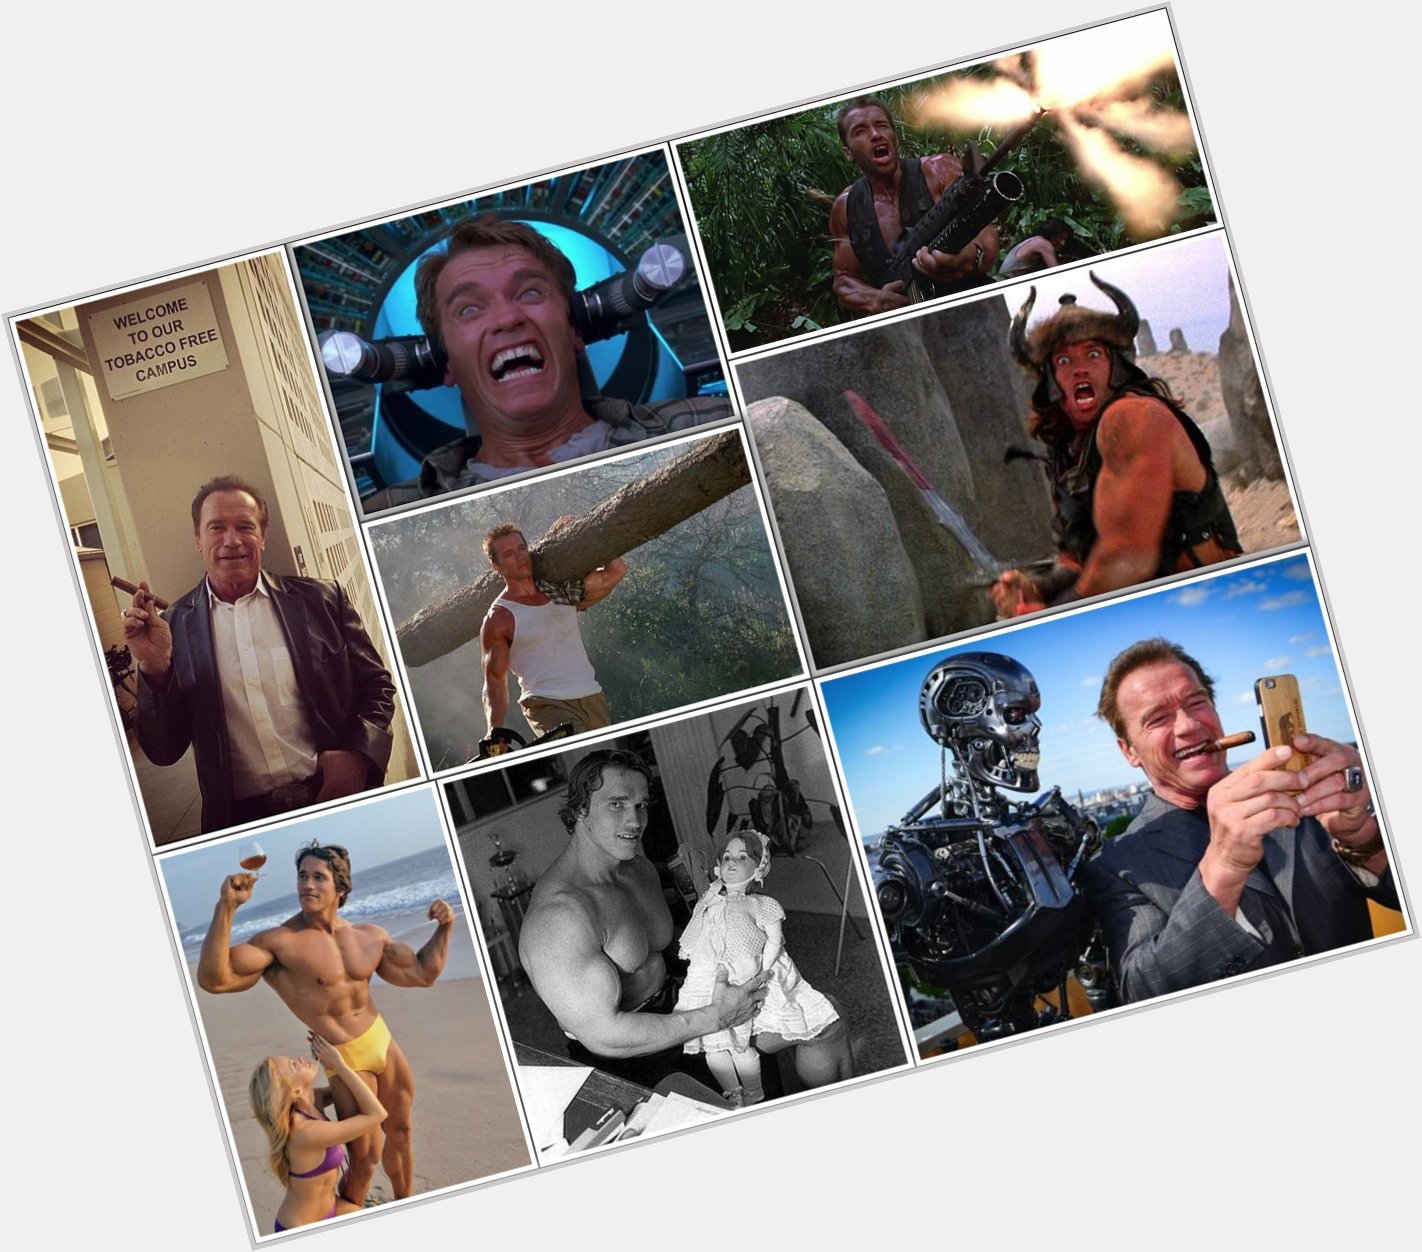 Wishing Arnold a hugely Happy 70th Birthday!
\"If my life was a movie, no one would believe it.\" 